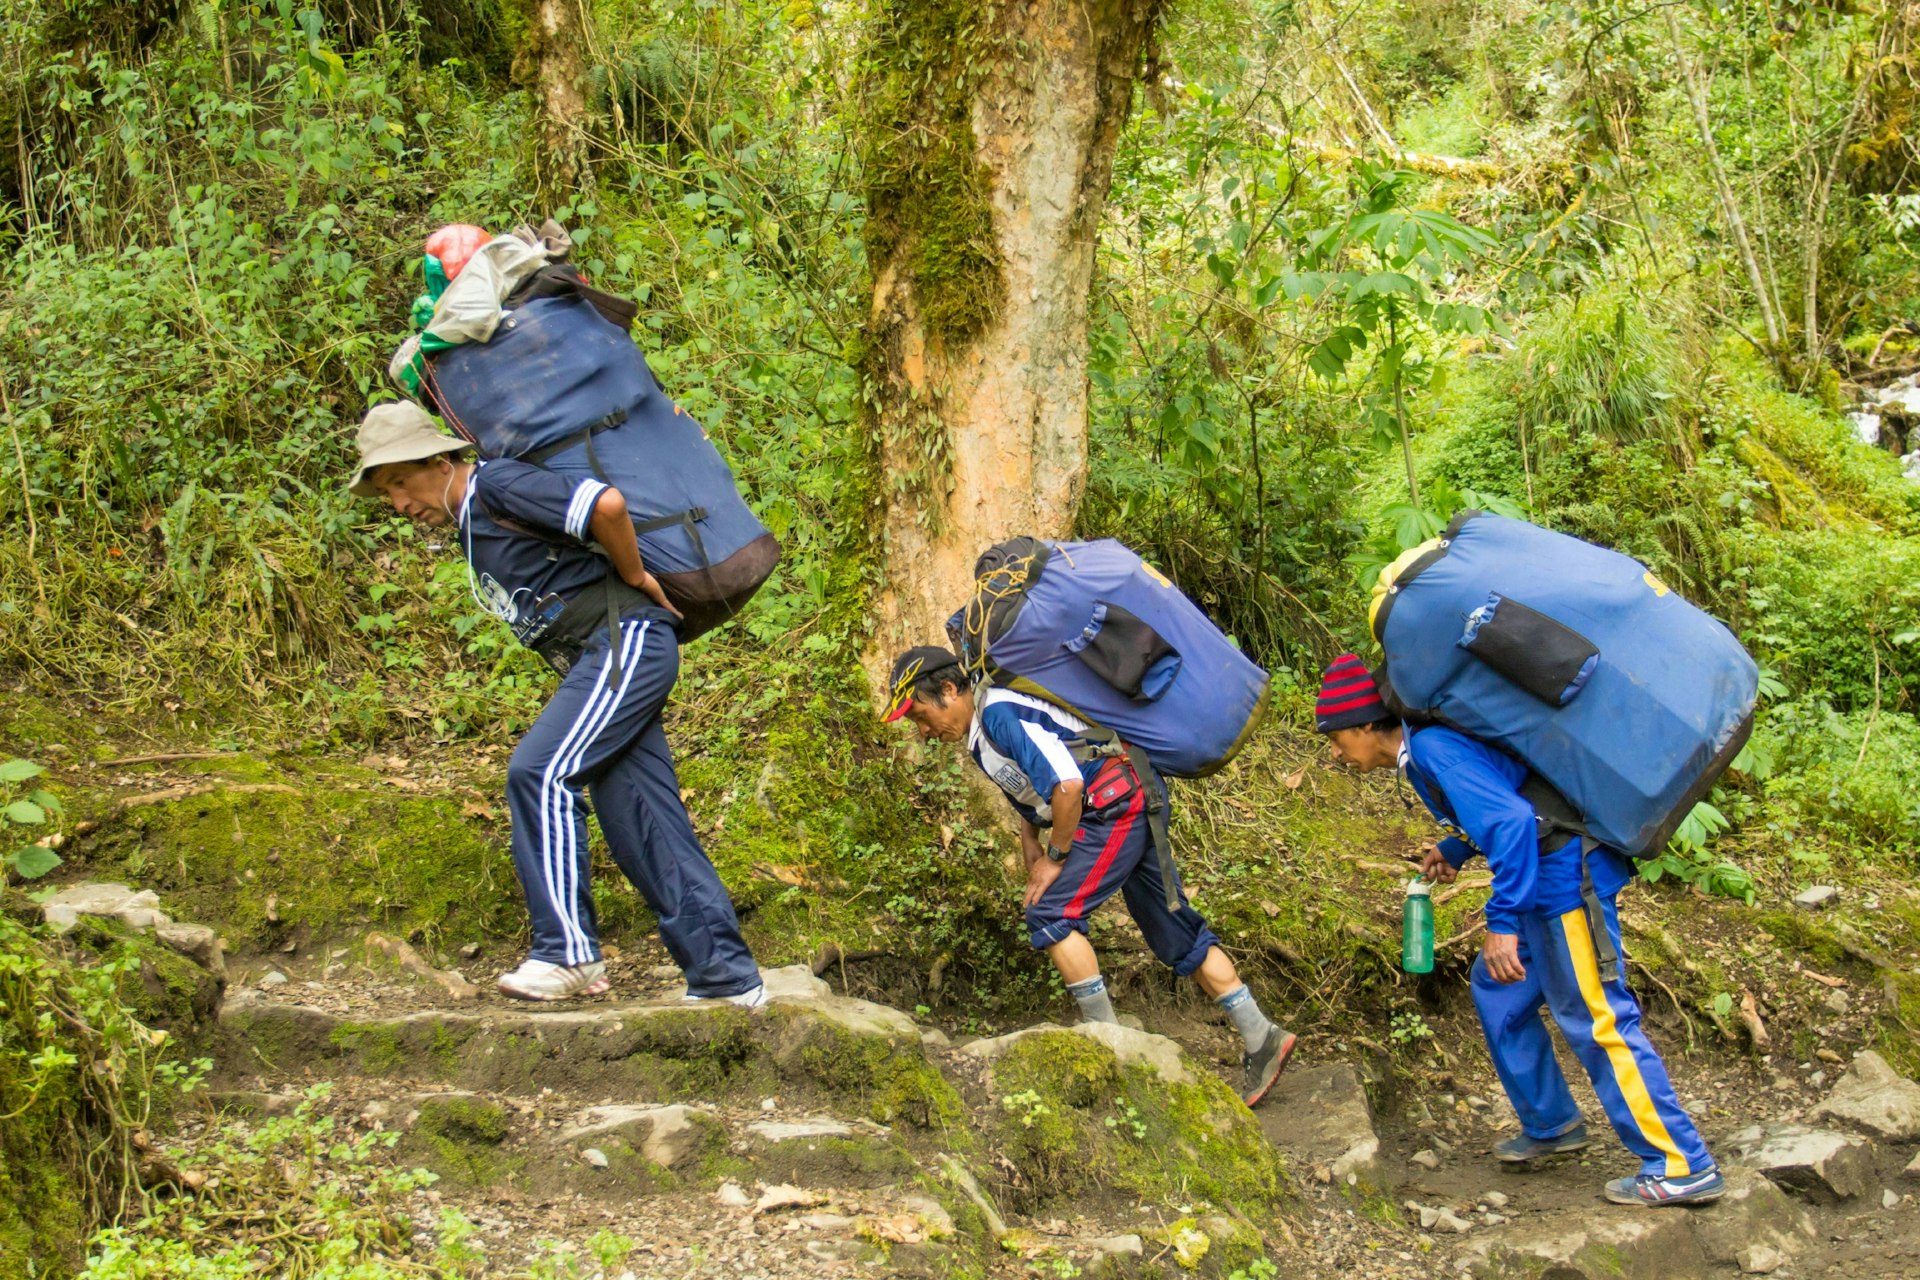 Peruvian porters with loaded packs carrying camping gear for hikers on the Inca Trail at Machu Picchu